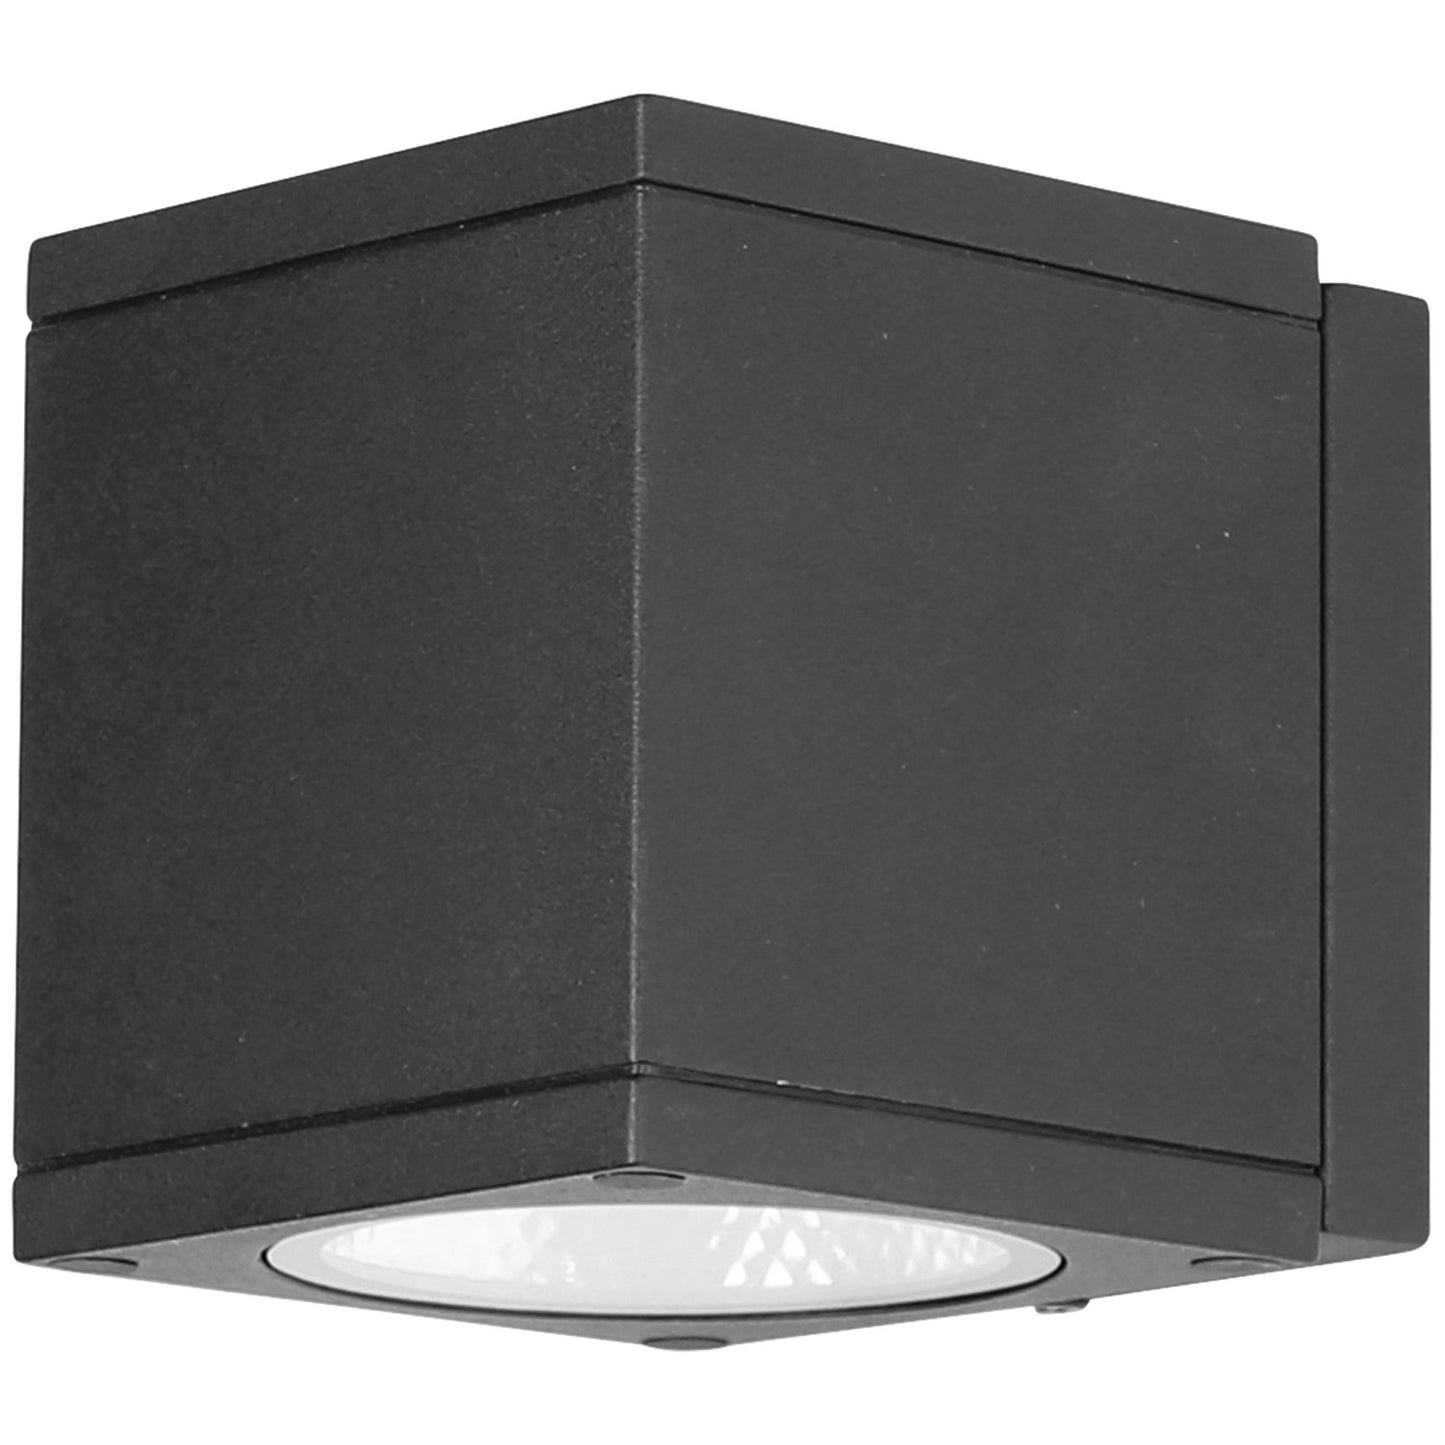 Sunlite 81291 LED Cube Up Or Down Outdoor Fixture, 9 Watts, 650 Lumens, 30k/40k/50k Color Tunable, 80 CRI, ETL Listed, Black, For Residential &amp; Commercial Use